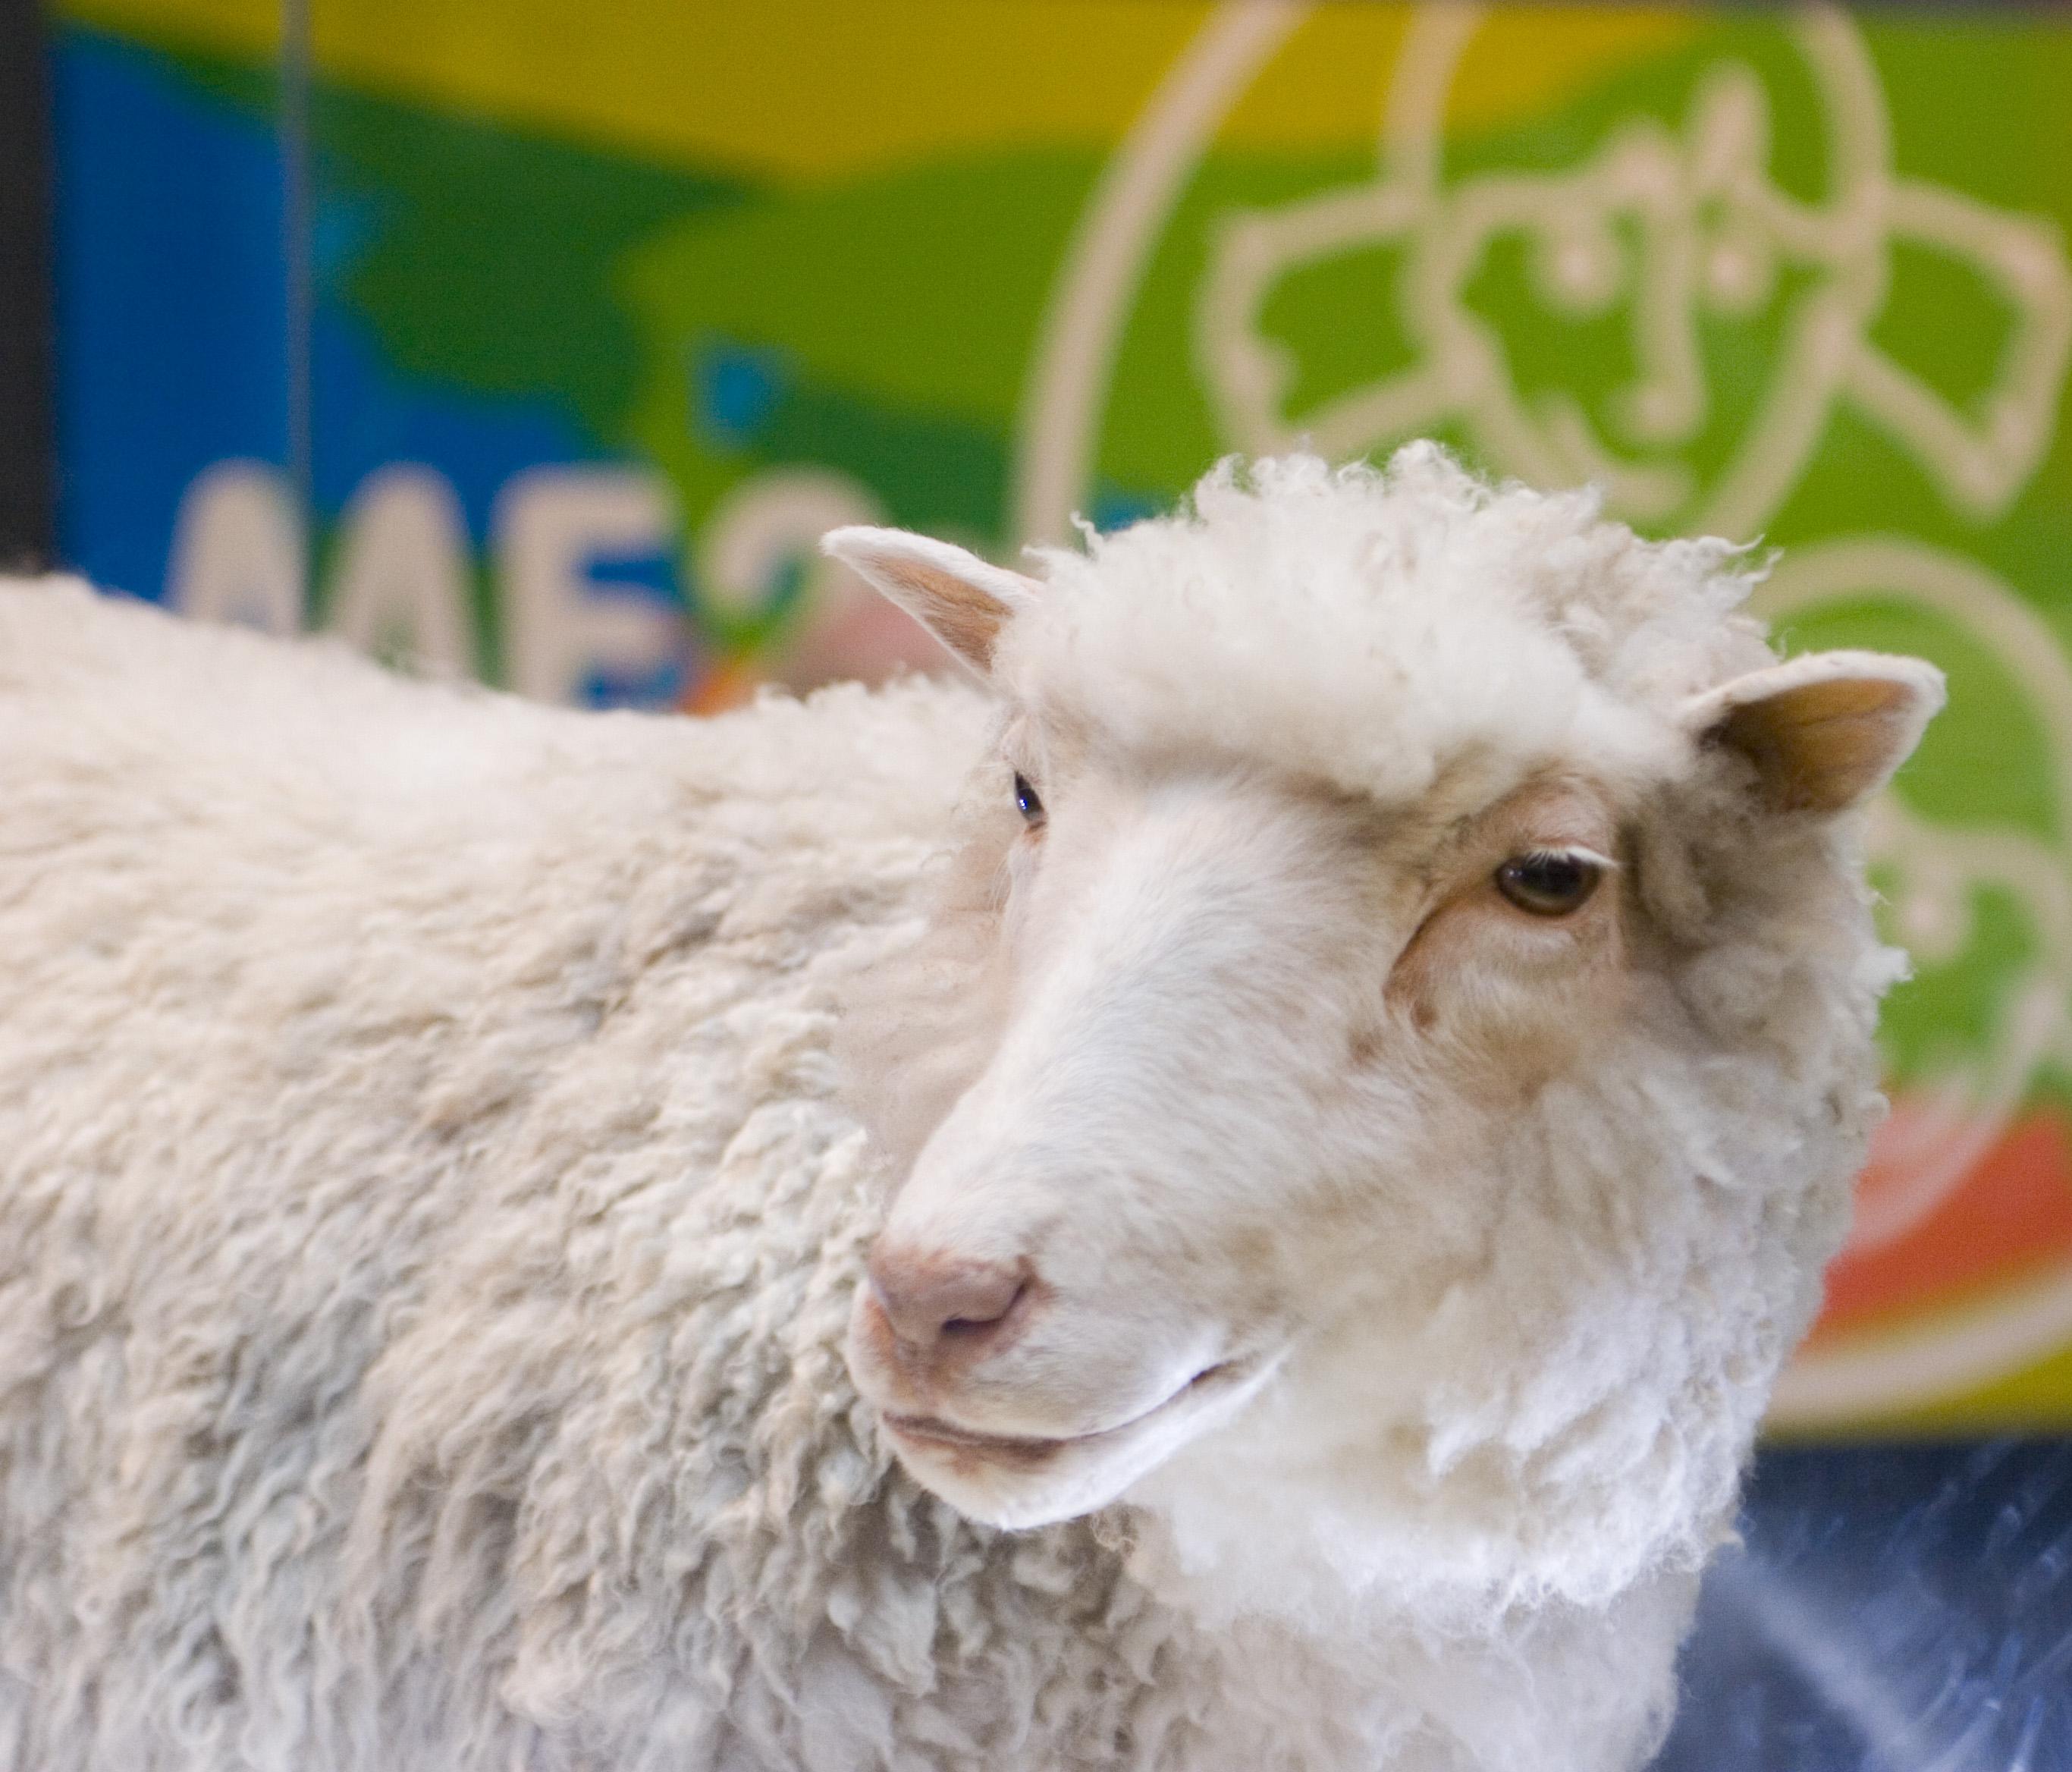 Dolly the sheep with her head turned in front of a rainbow banner